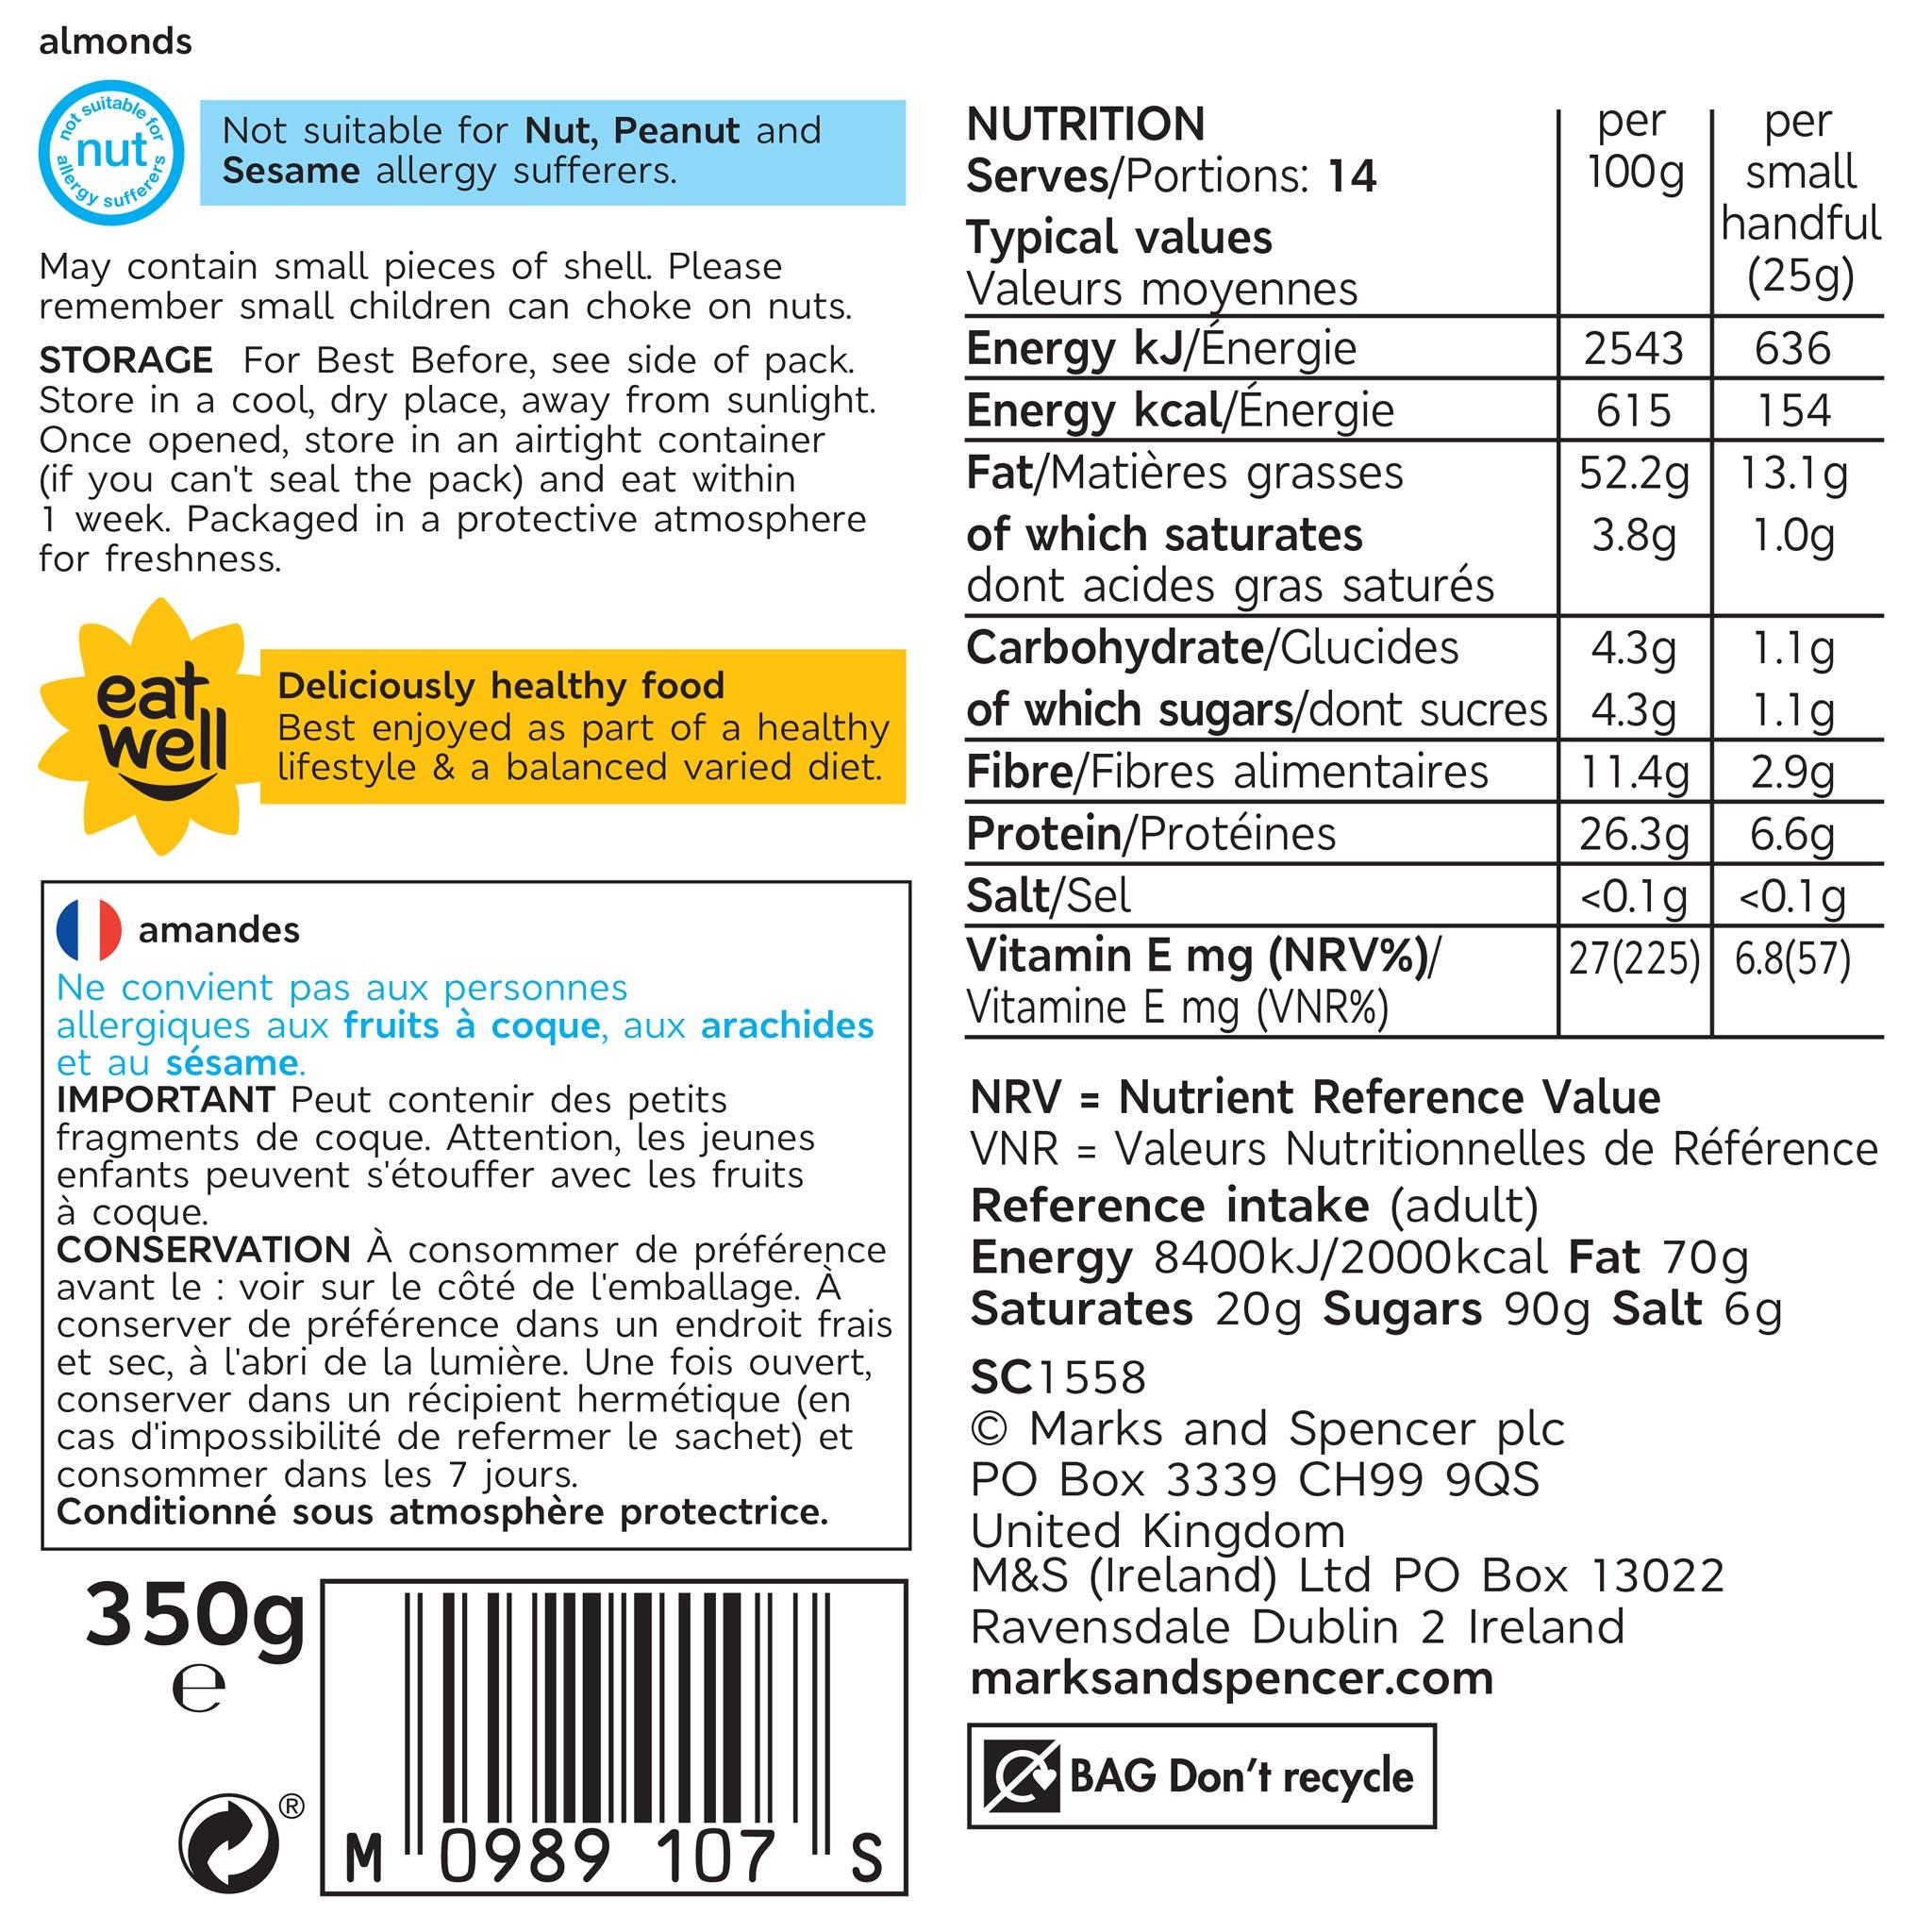 Roasted Almonds 350g Label